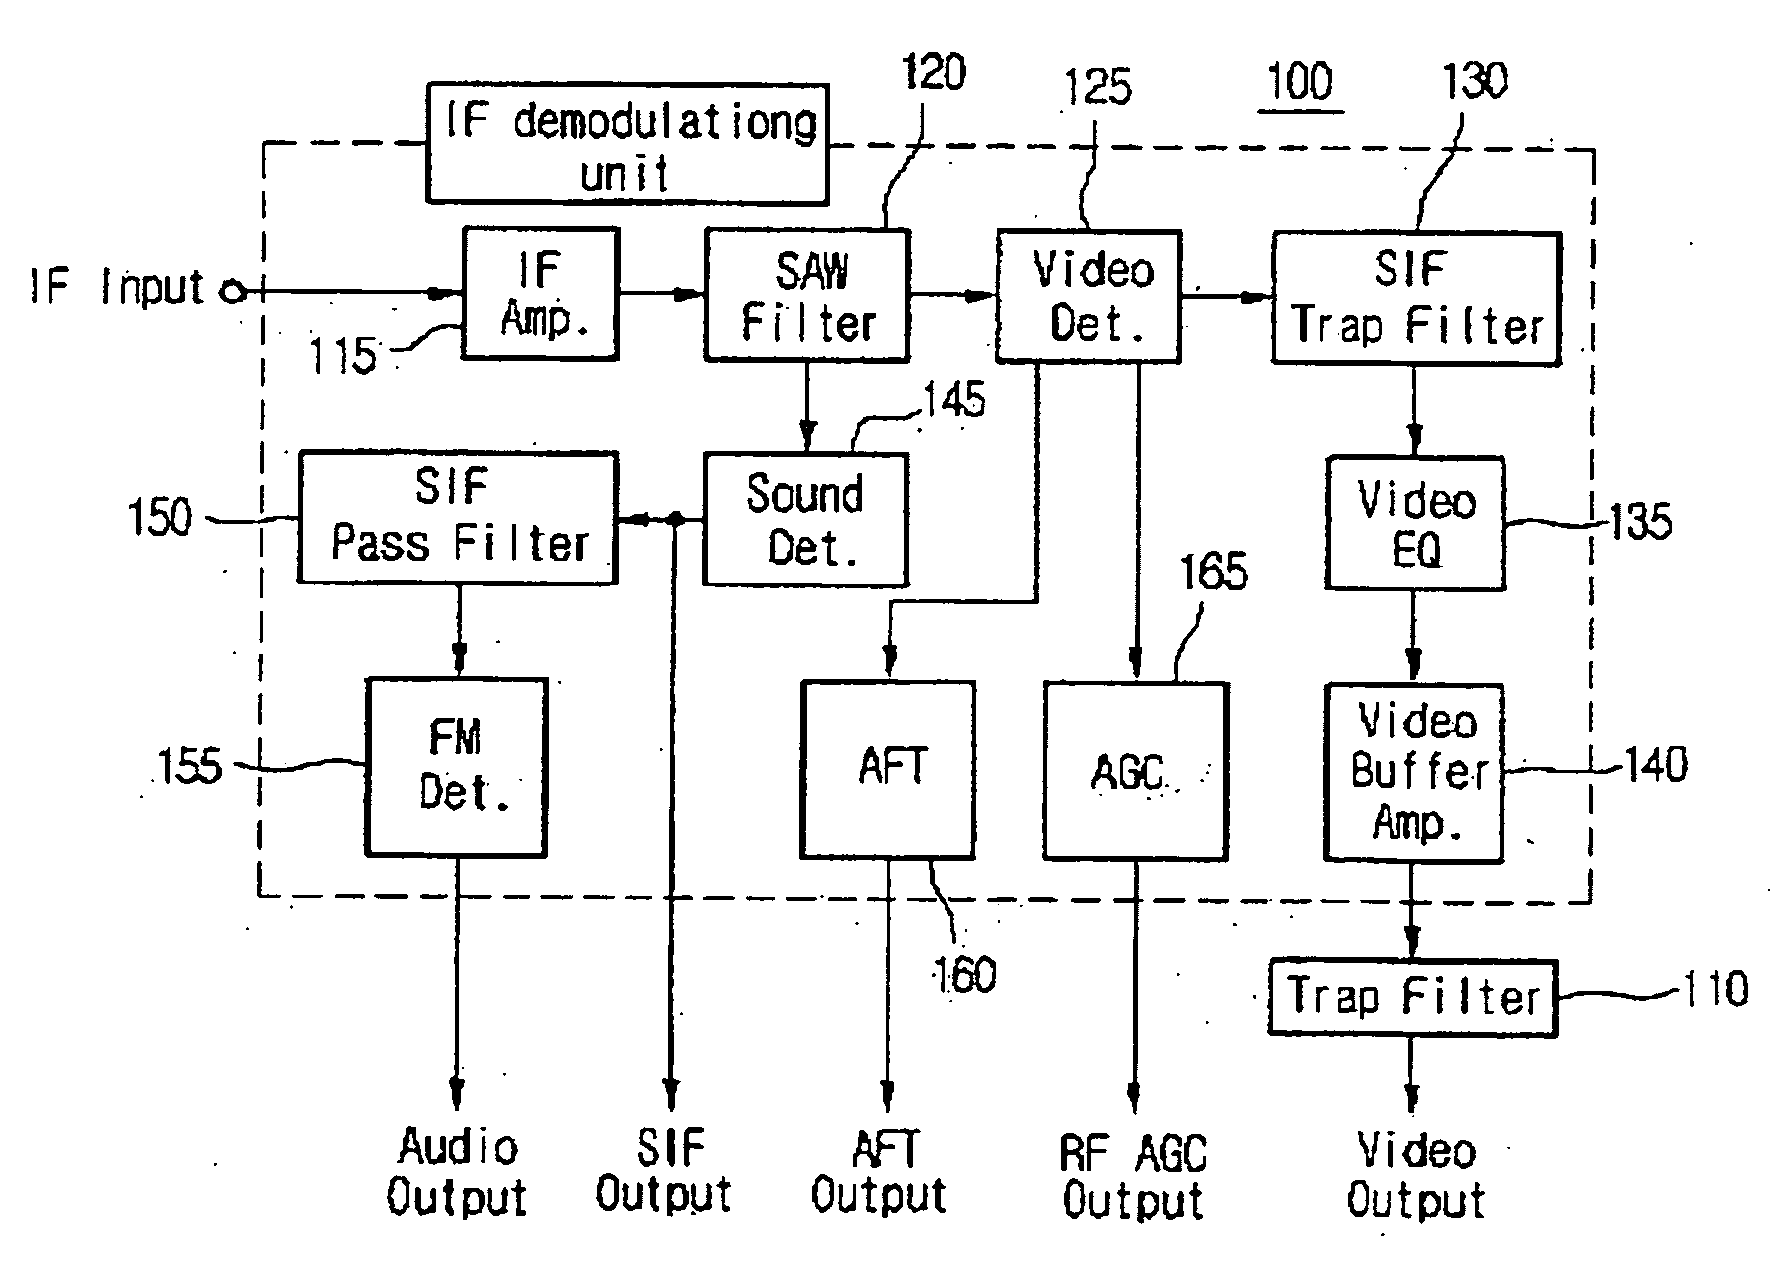 Tuner and Demodulating Unit Thereof